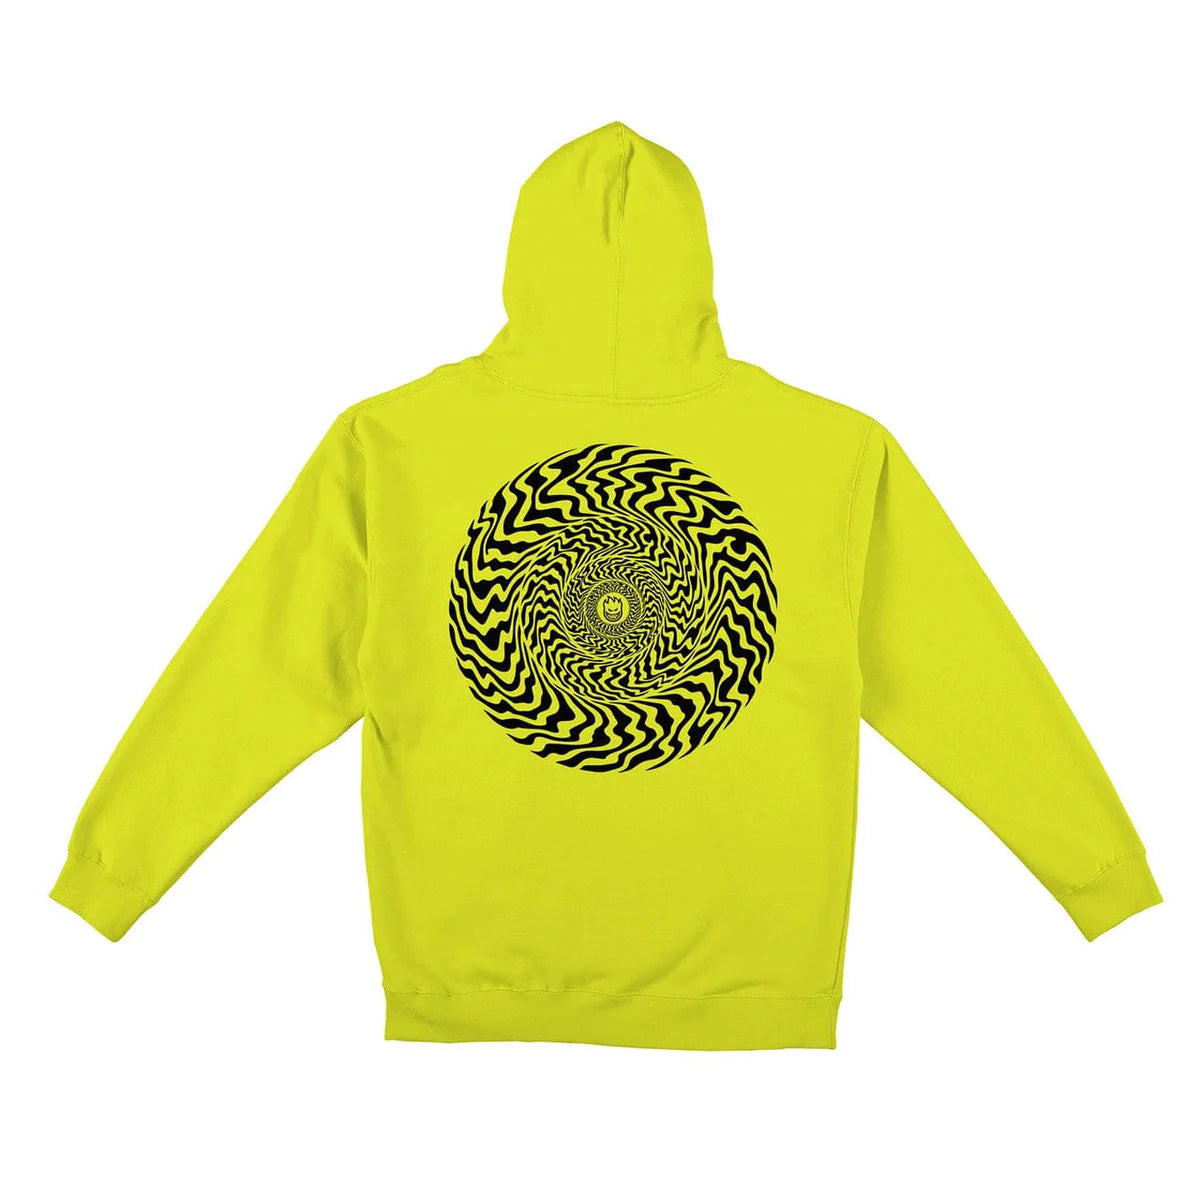 SPITFIRE WHEELS SWIRLED CLASSIC HOODIE - SAFETY YELLOW/BLACK